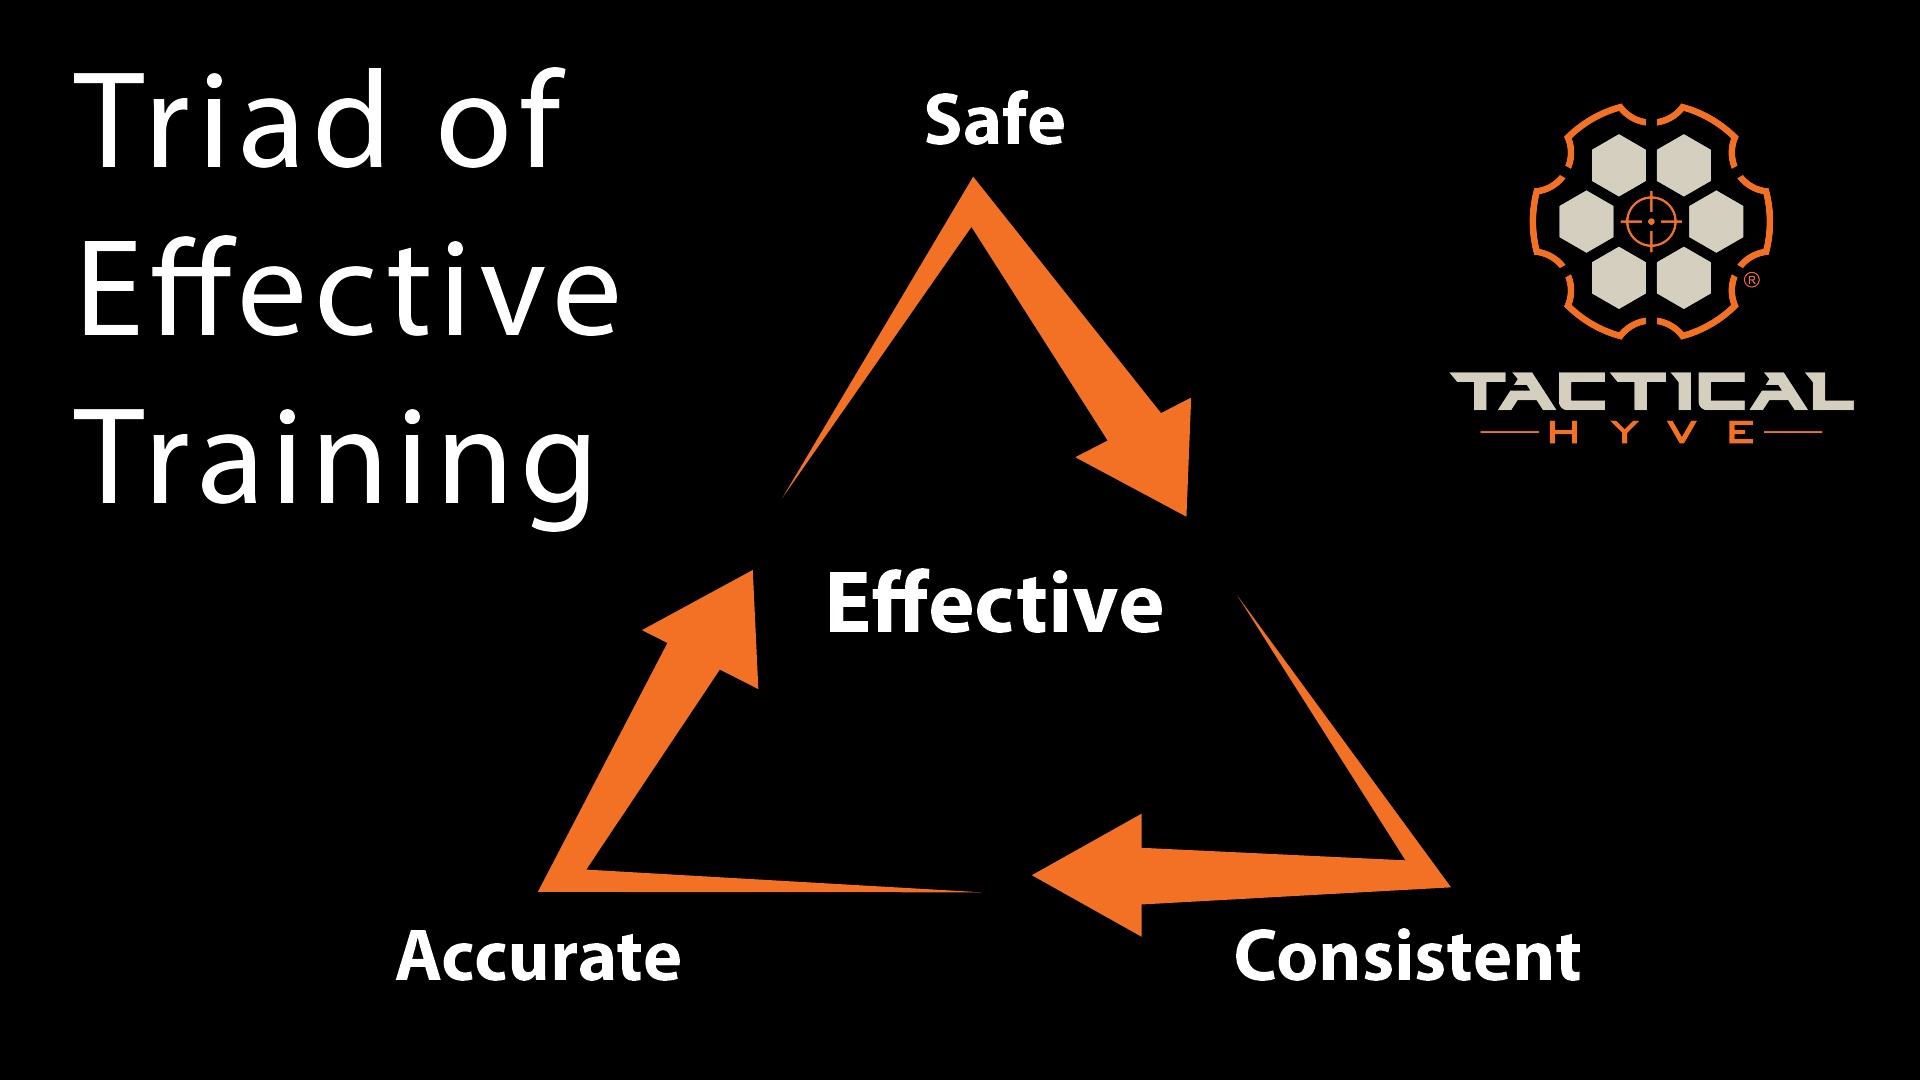 The triad of effective training